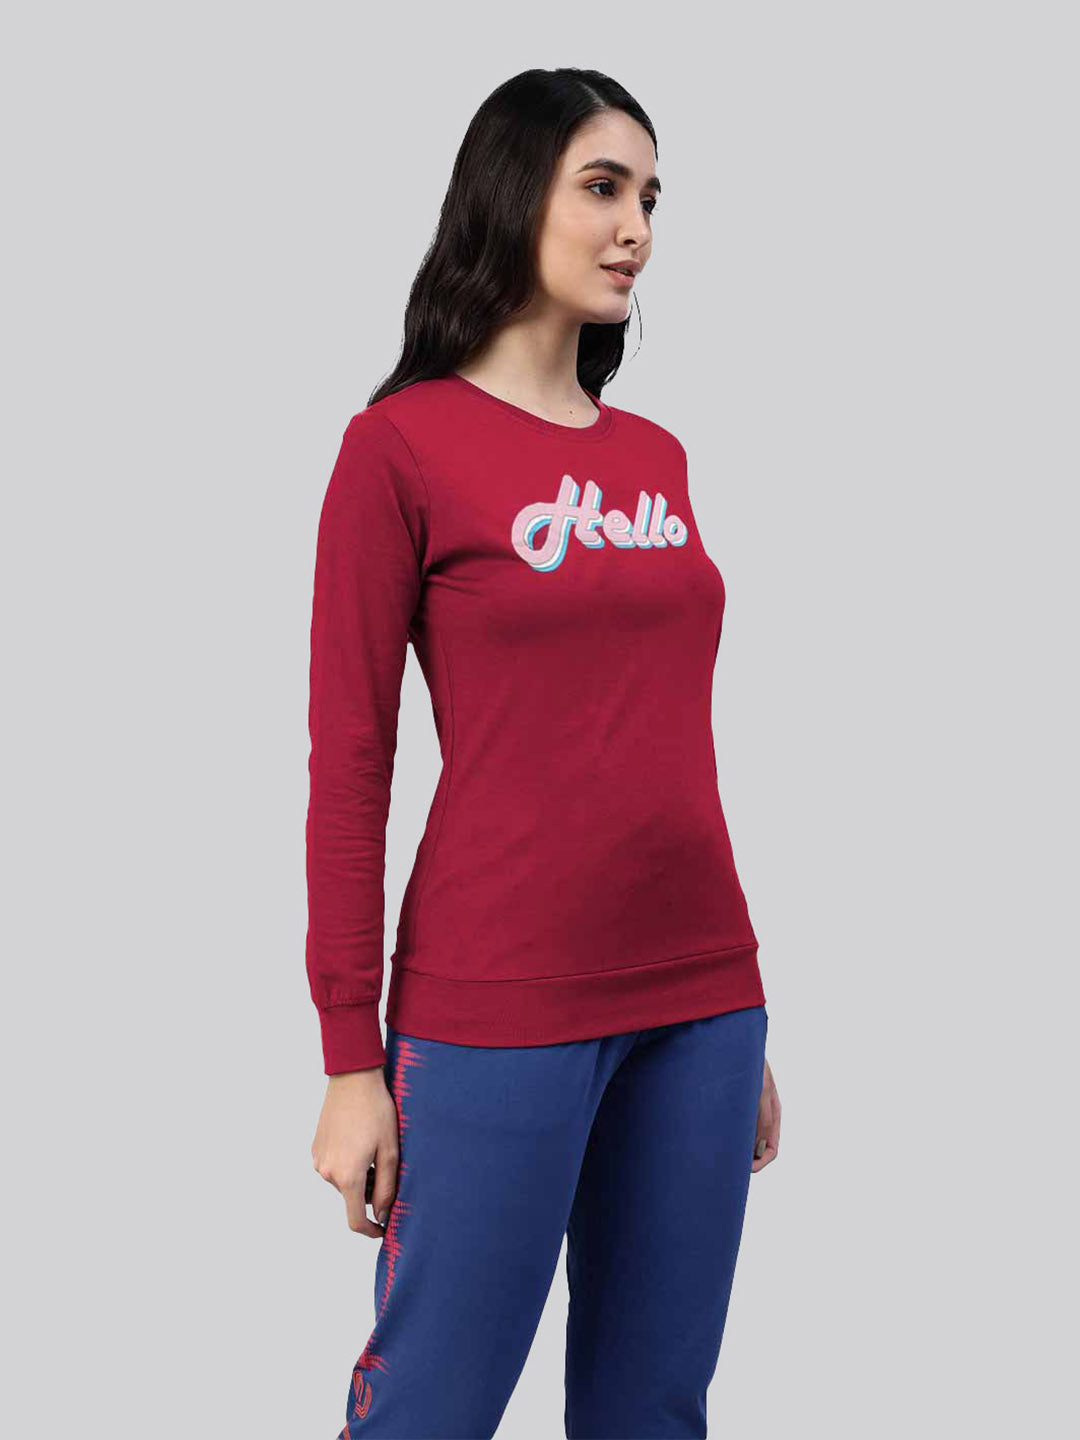 Cotton printed t-shirt for ladies